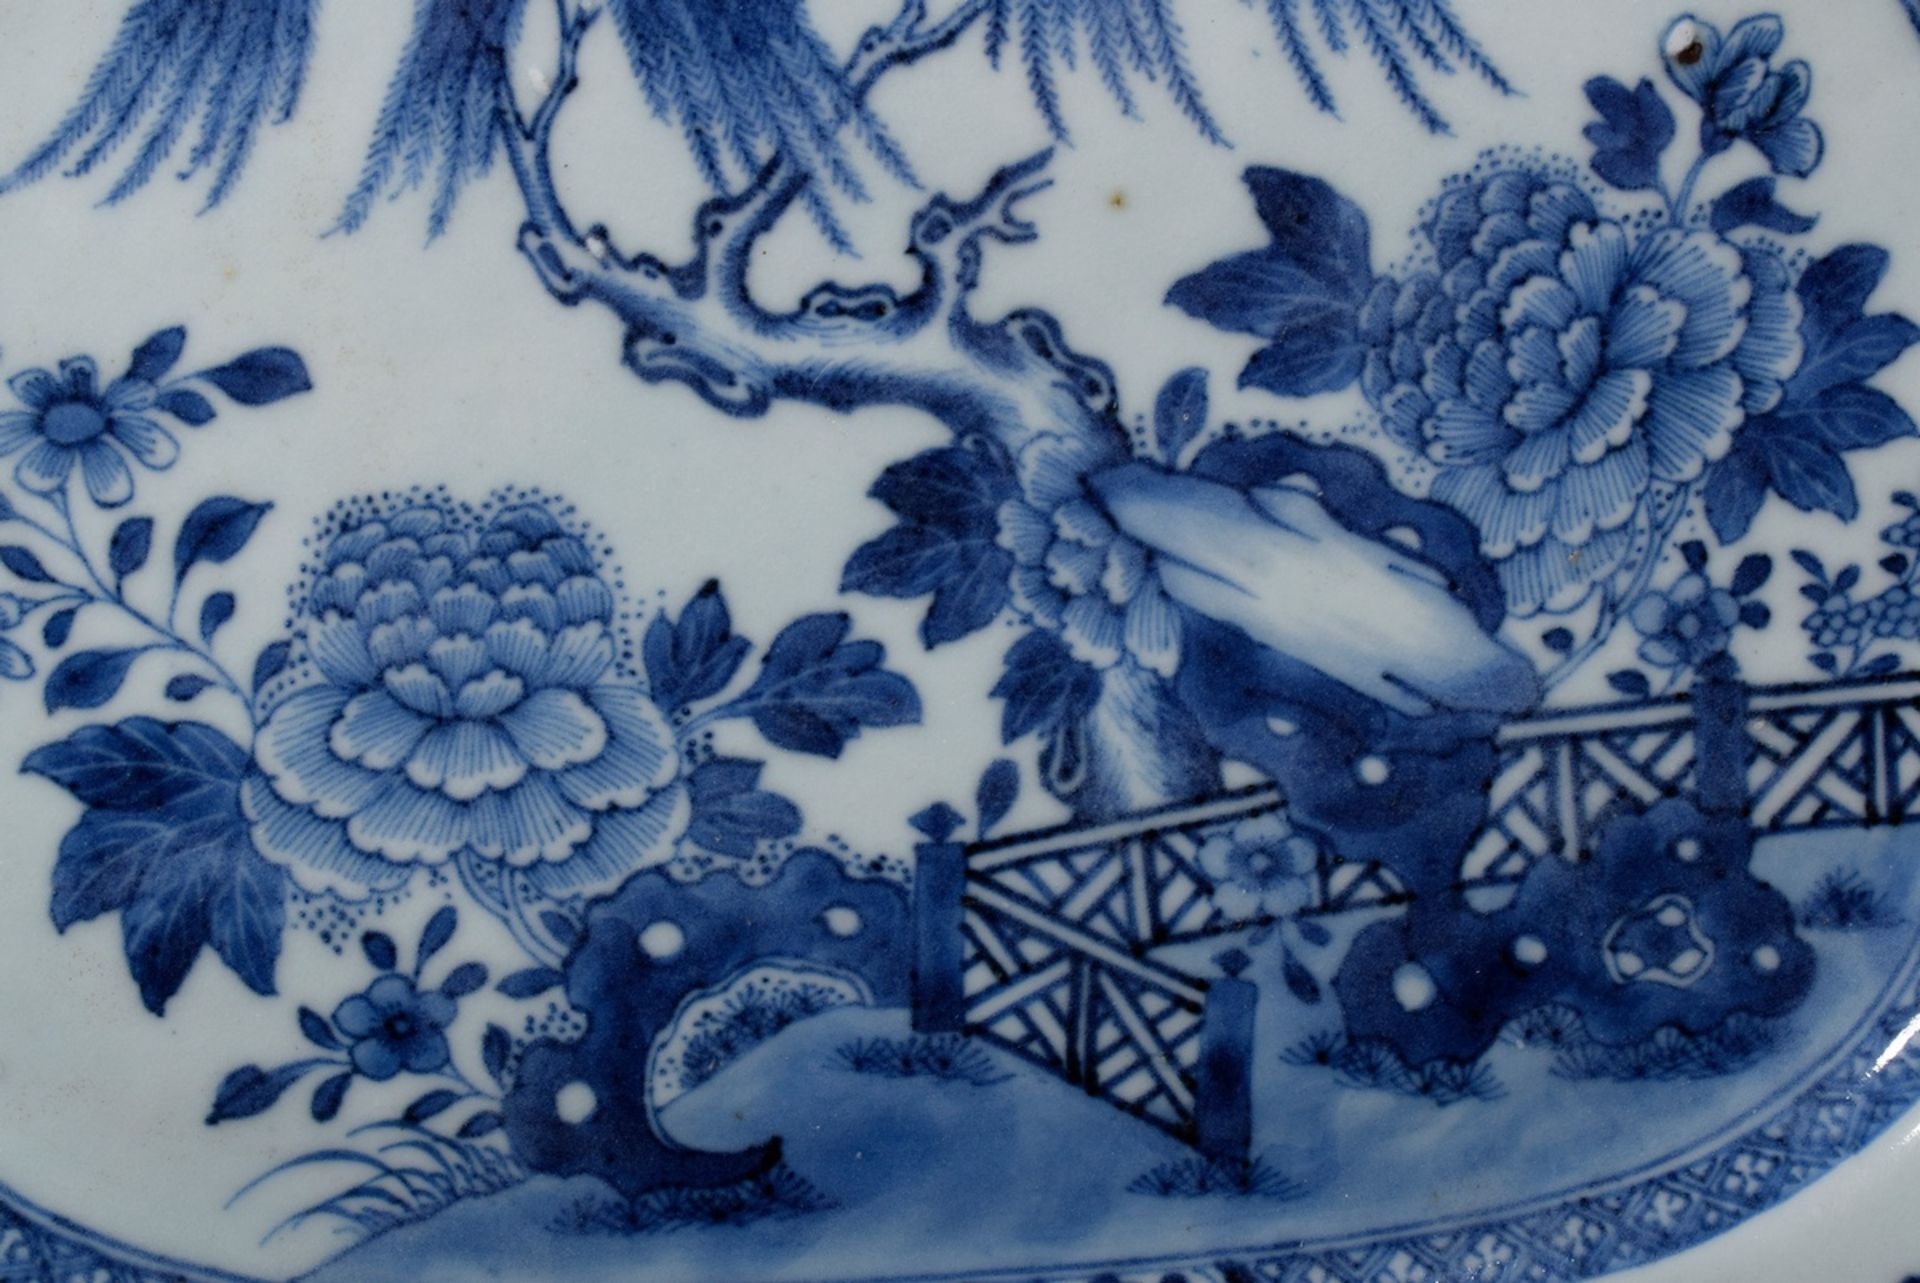 Octagonal plate with blue painting decoration "Garden", Qianlong period, China mid 18th century, 3, - Image 3 of 4